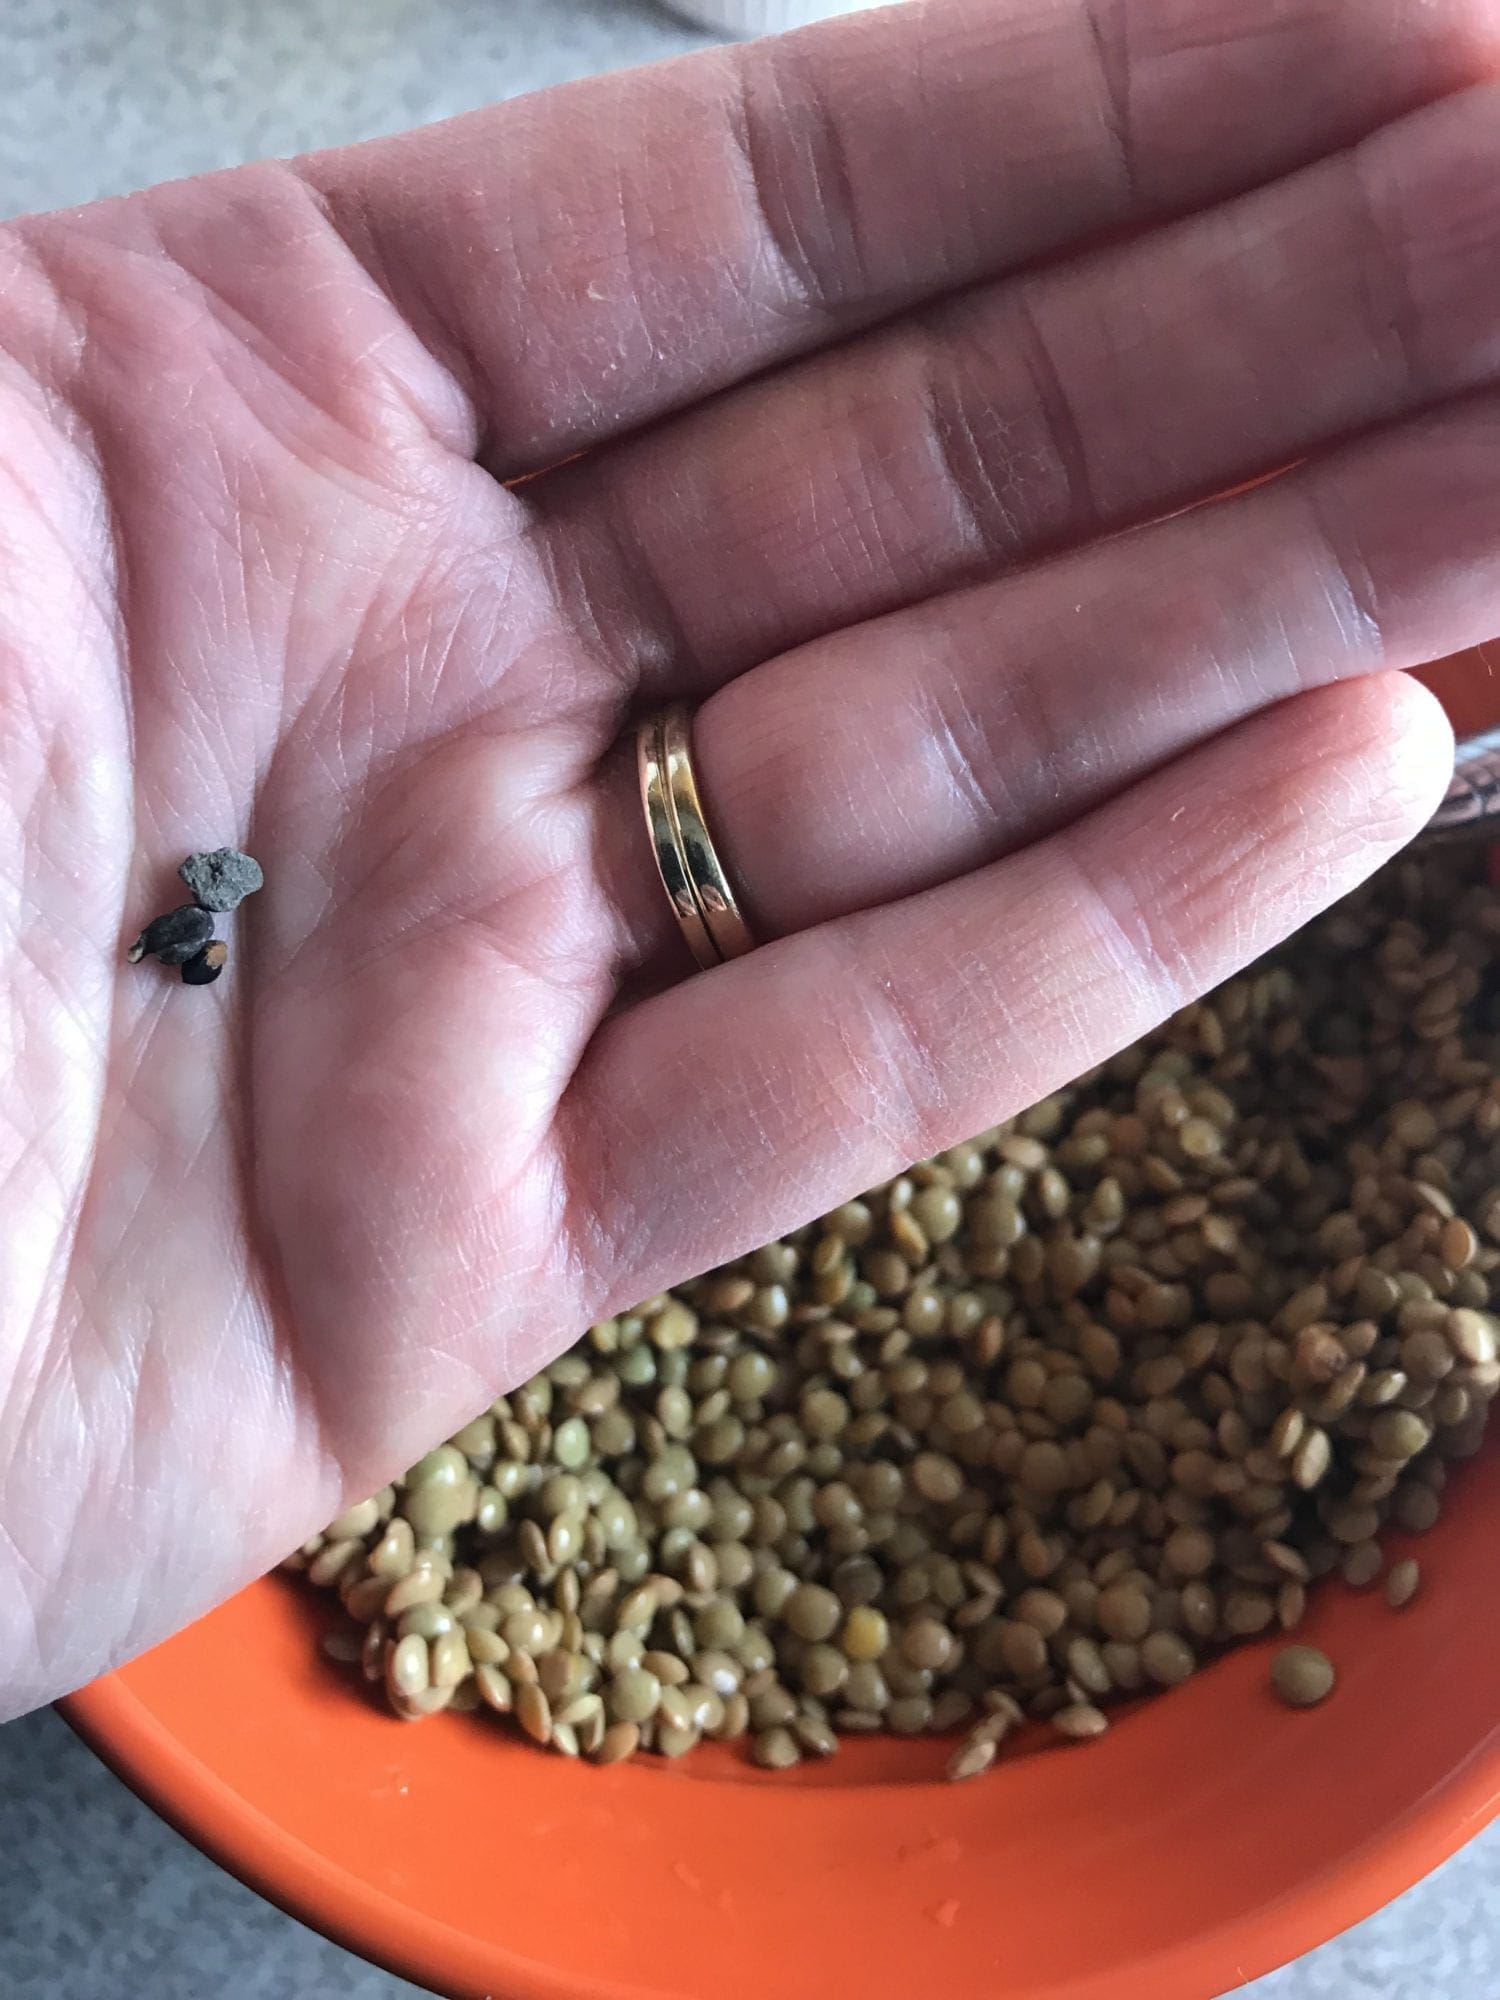 pebbles I found in my lentils